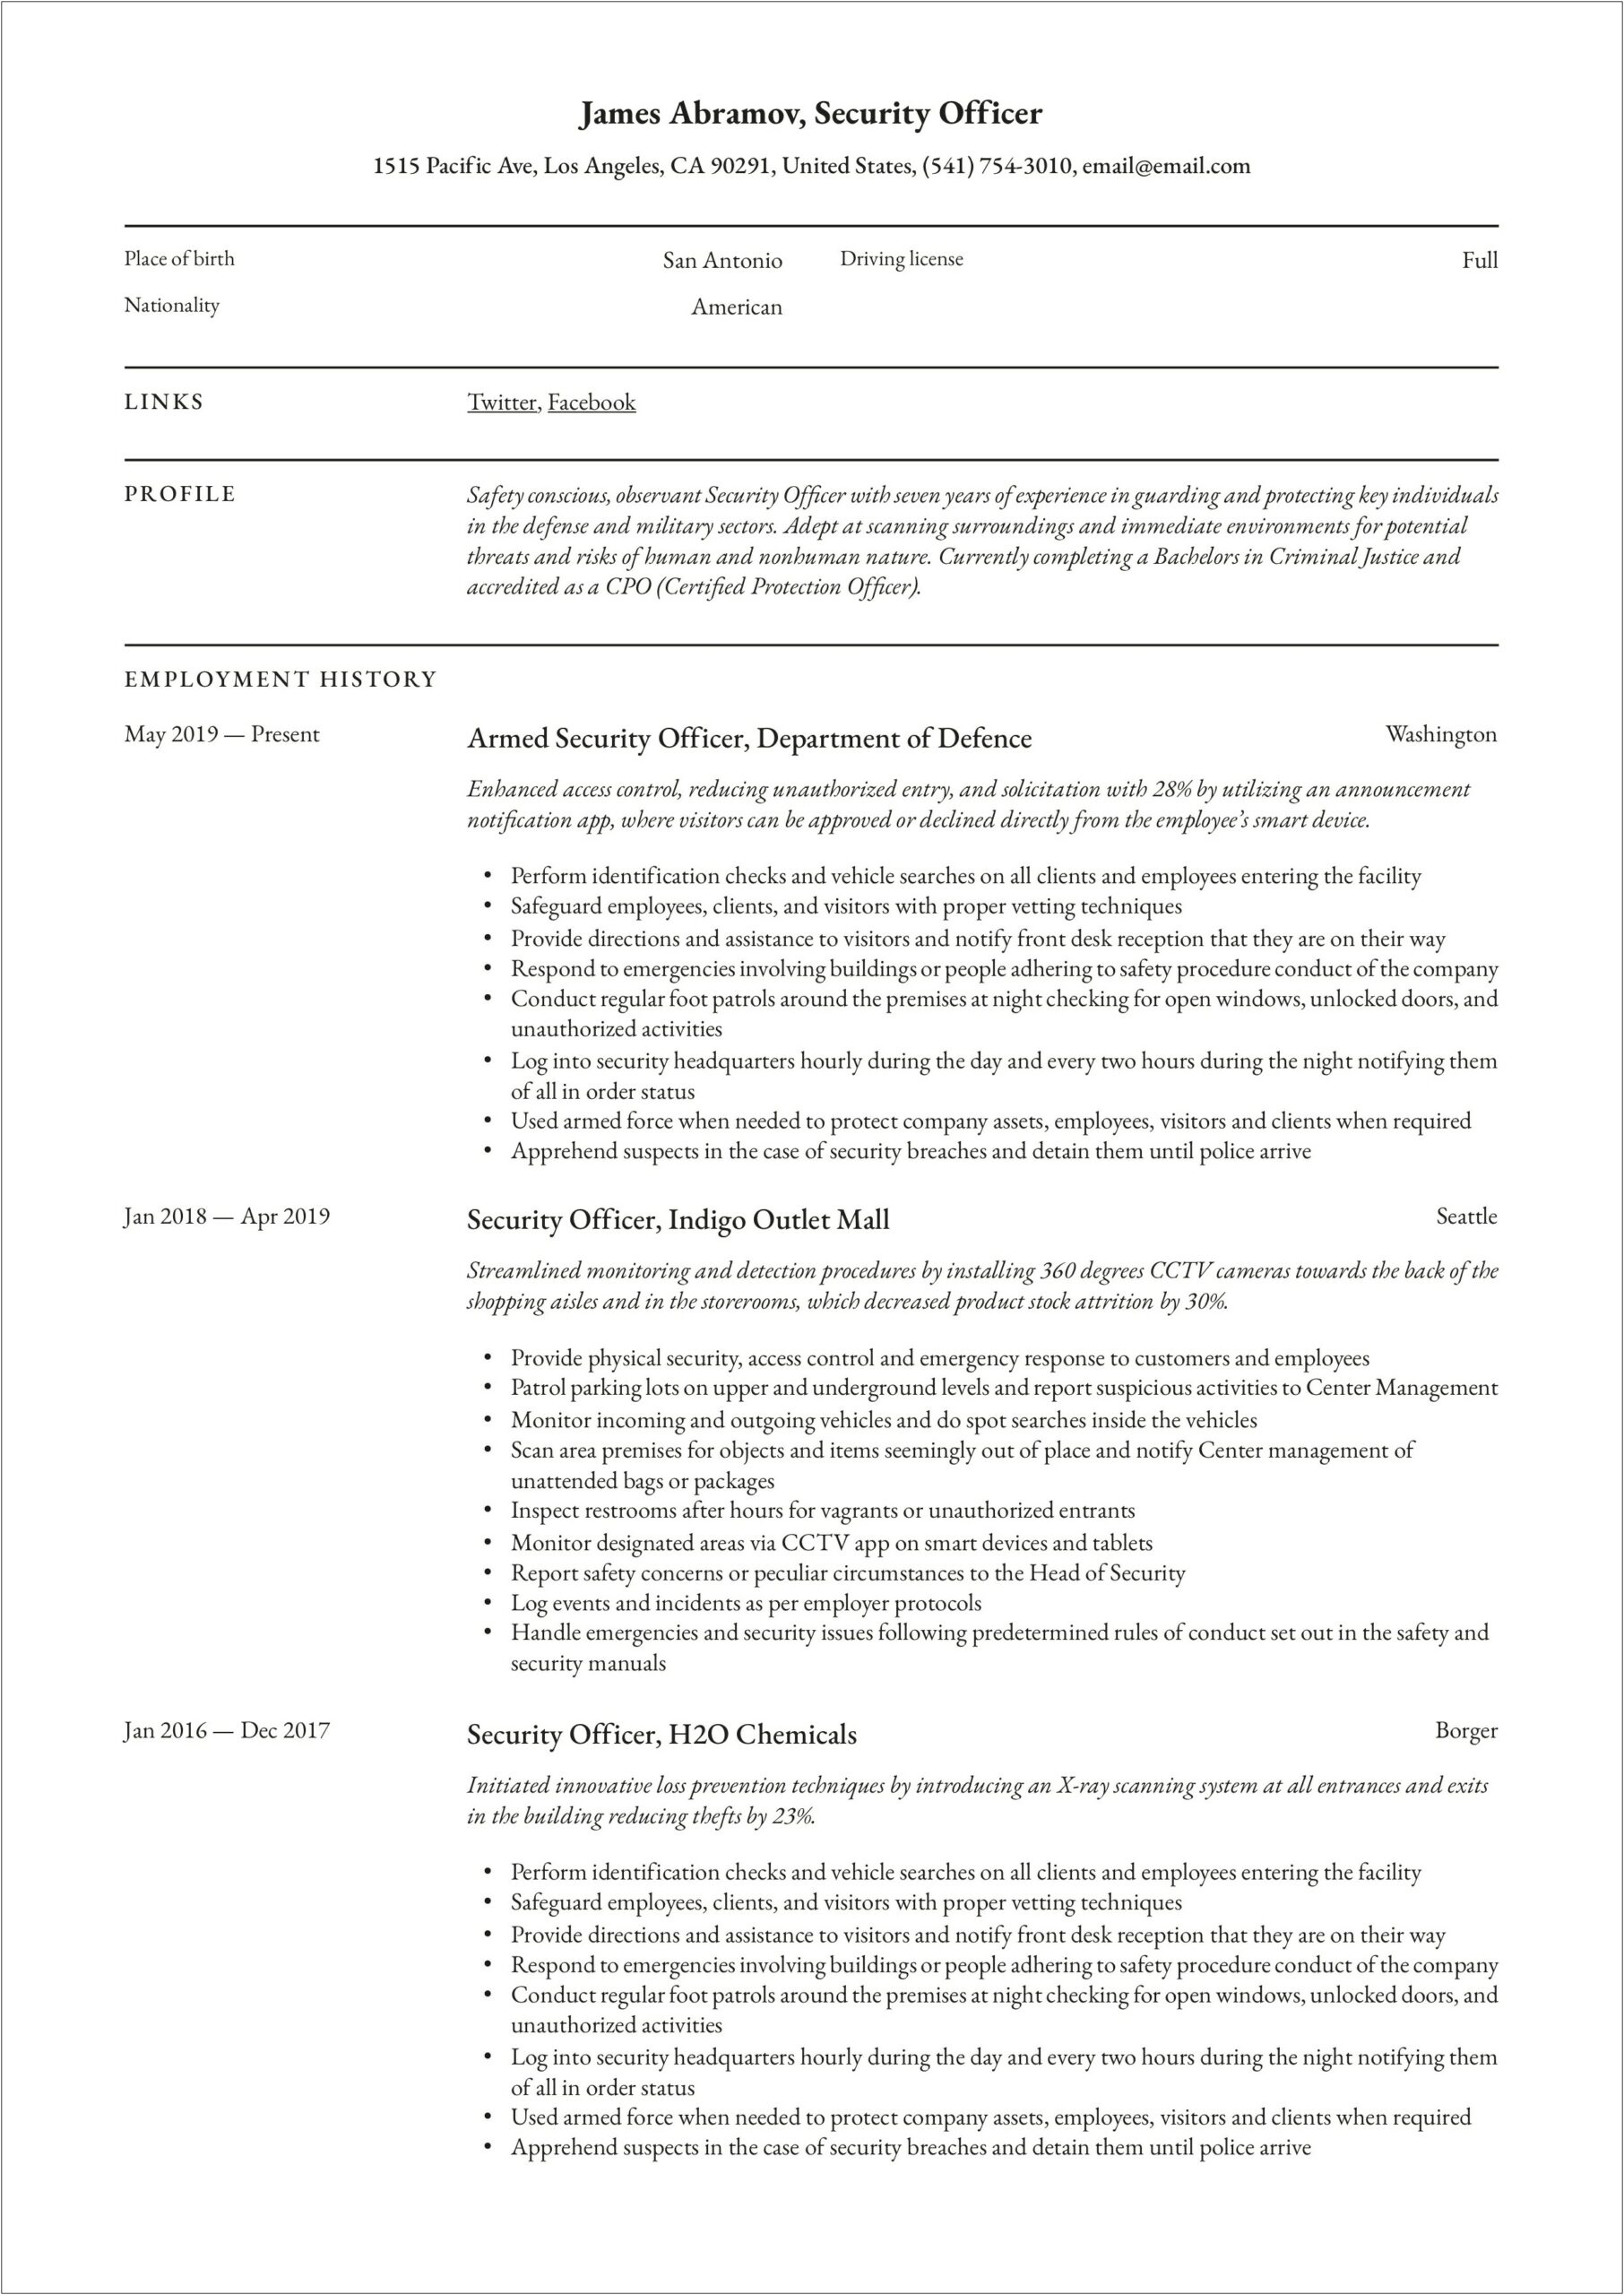 Resume Professional Summary For Security Guard